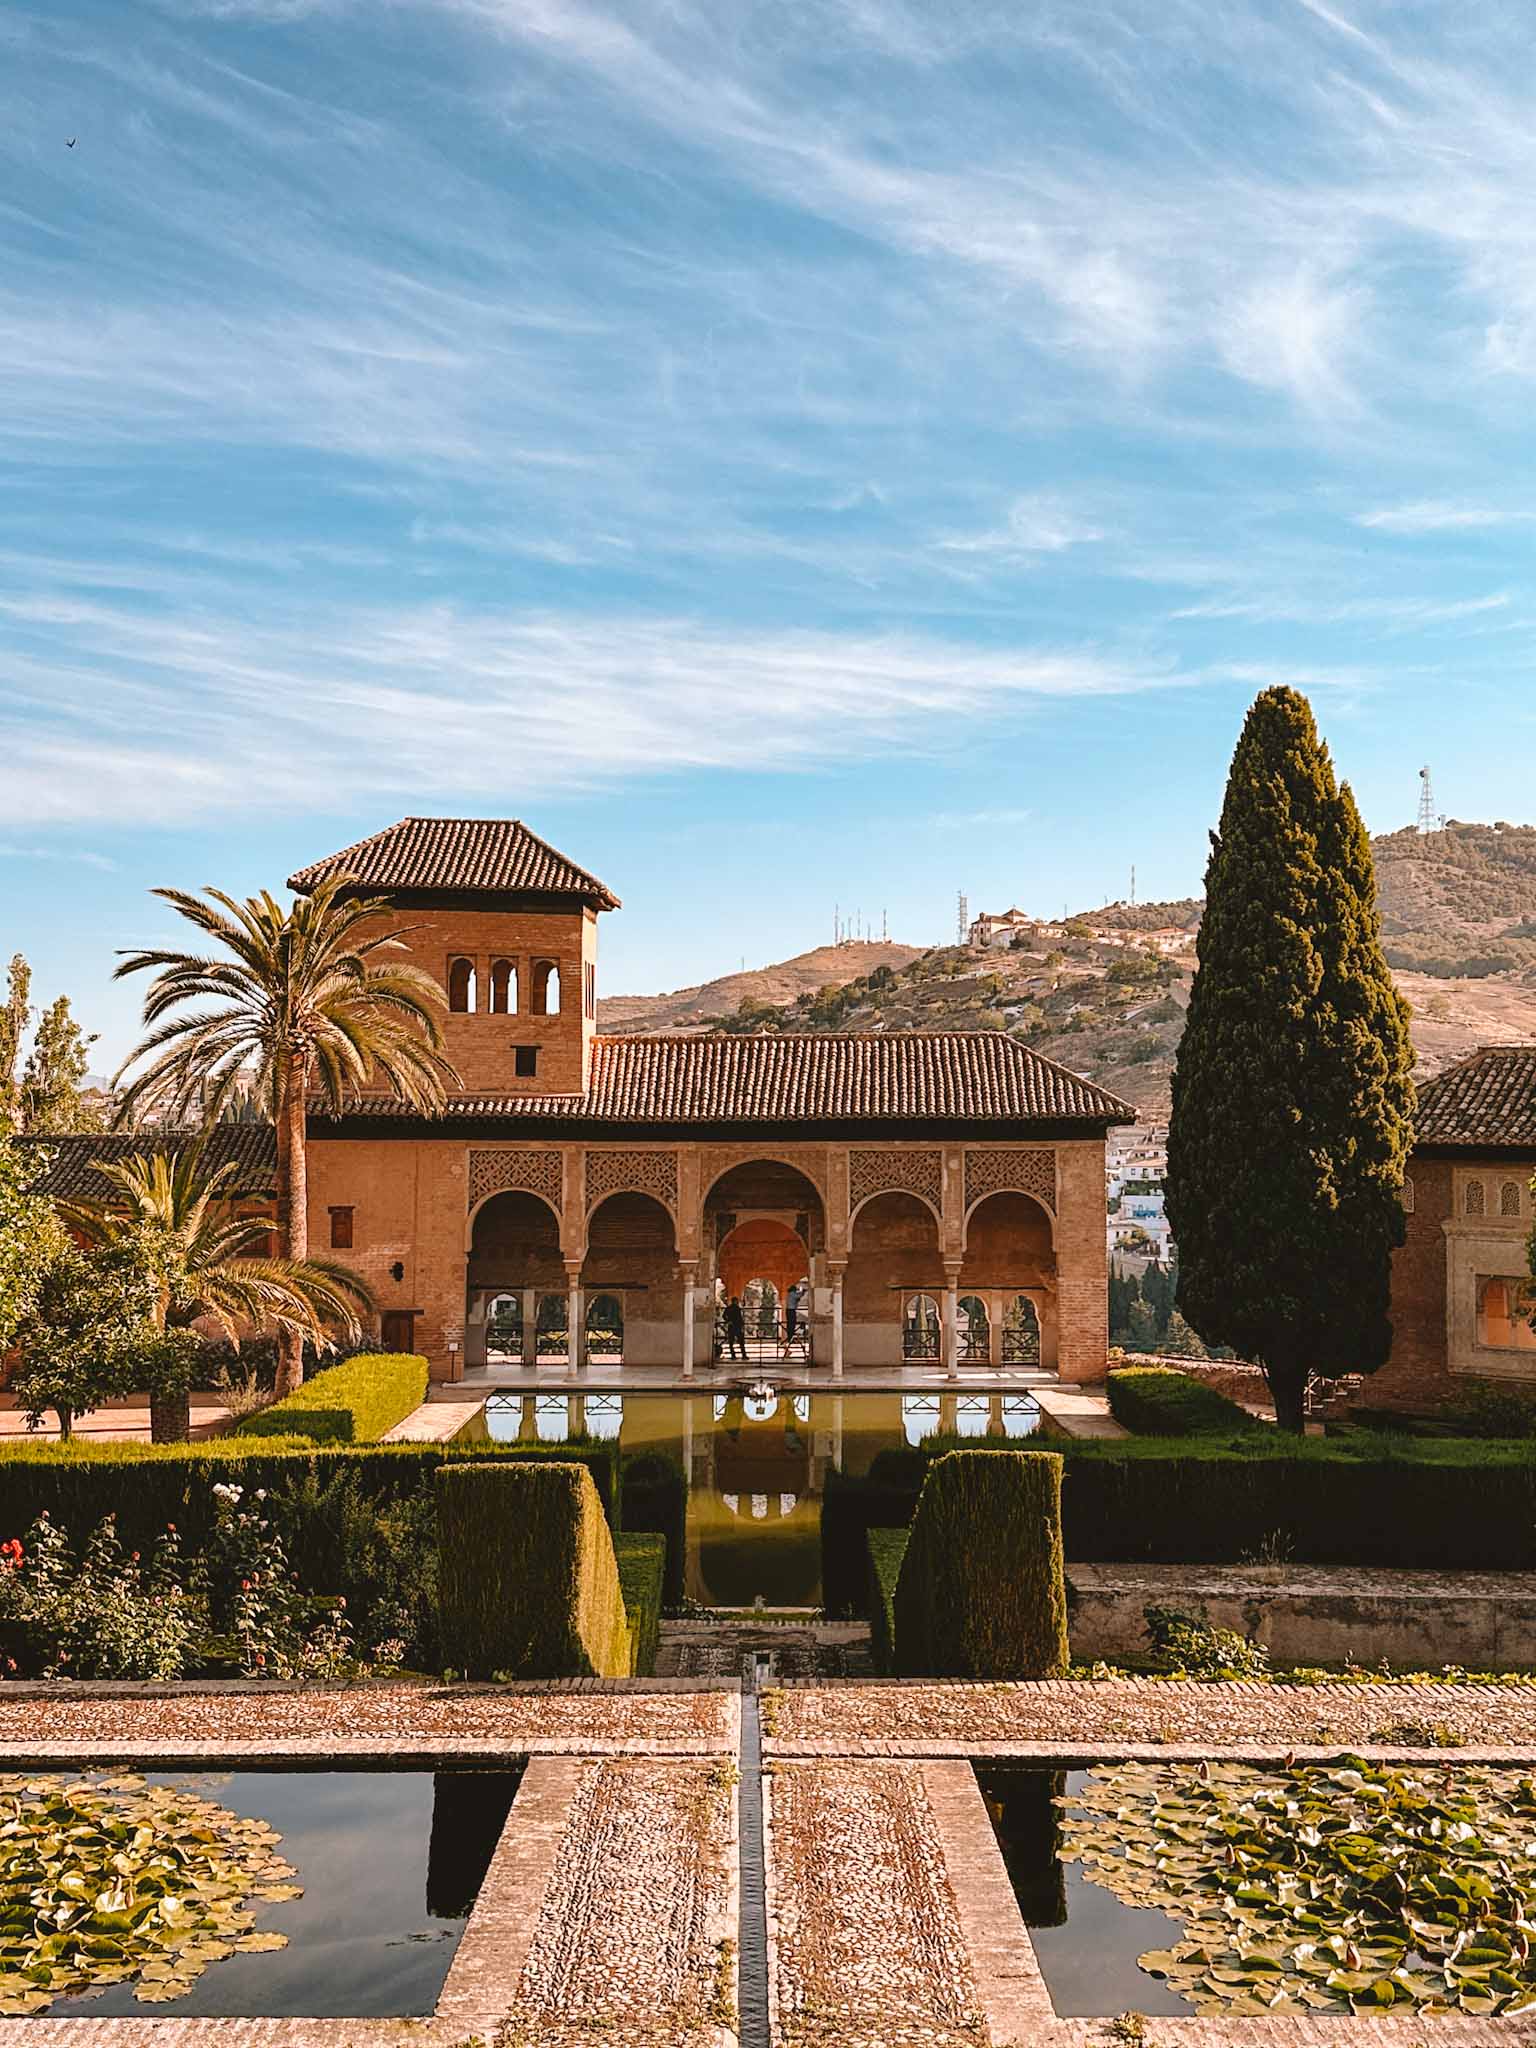 Granada, Spain - Partal Palace - one of the Nasrid Palaces in Alhambra